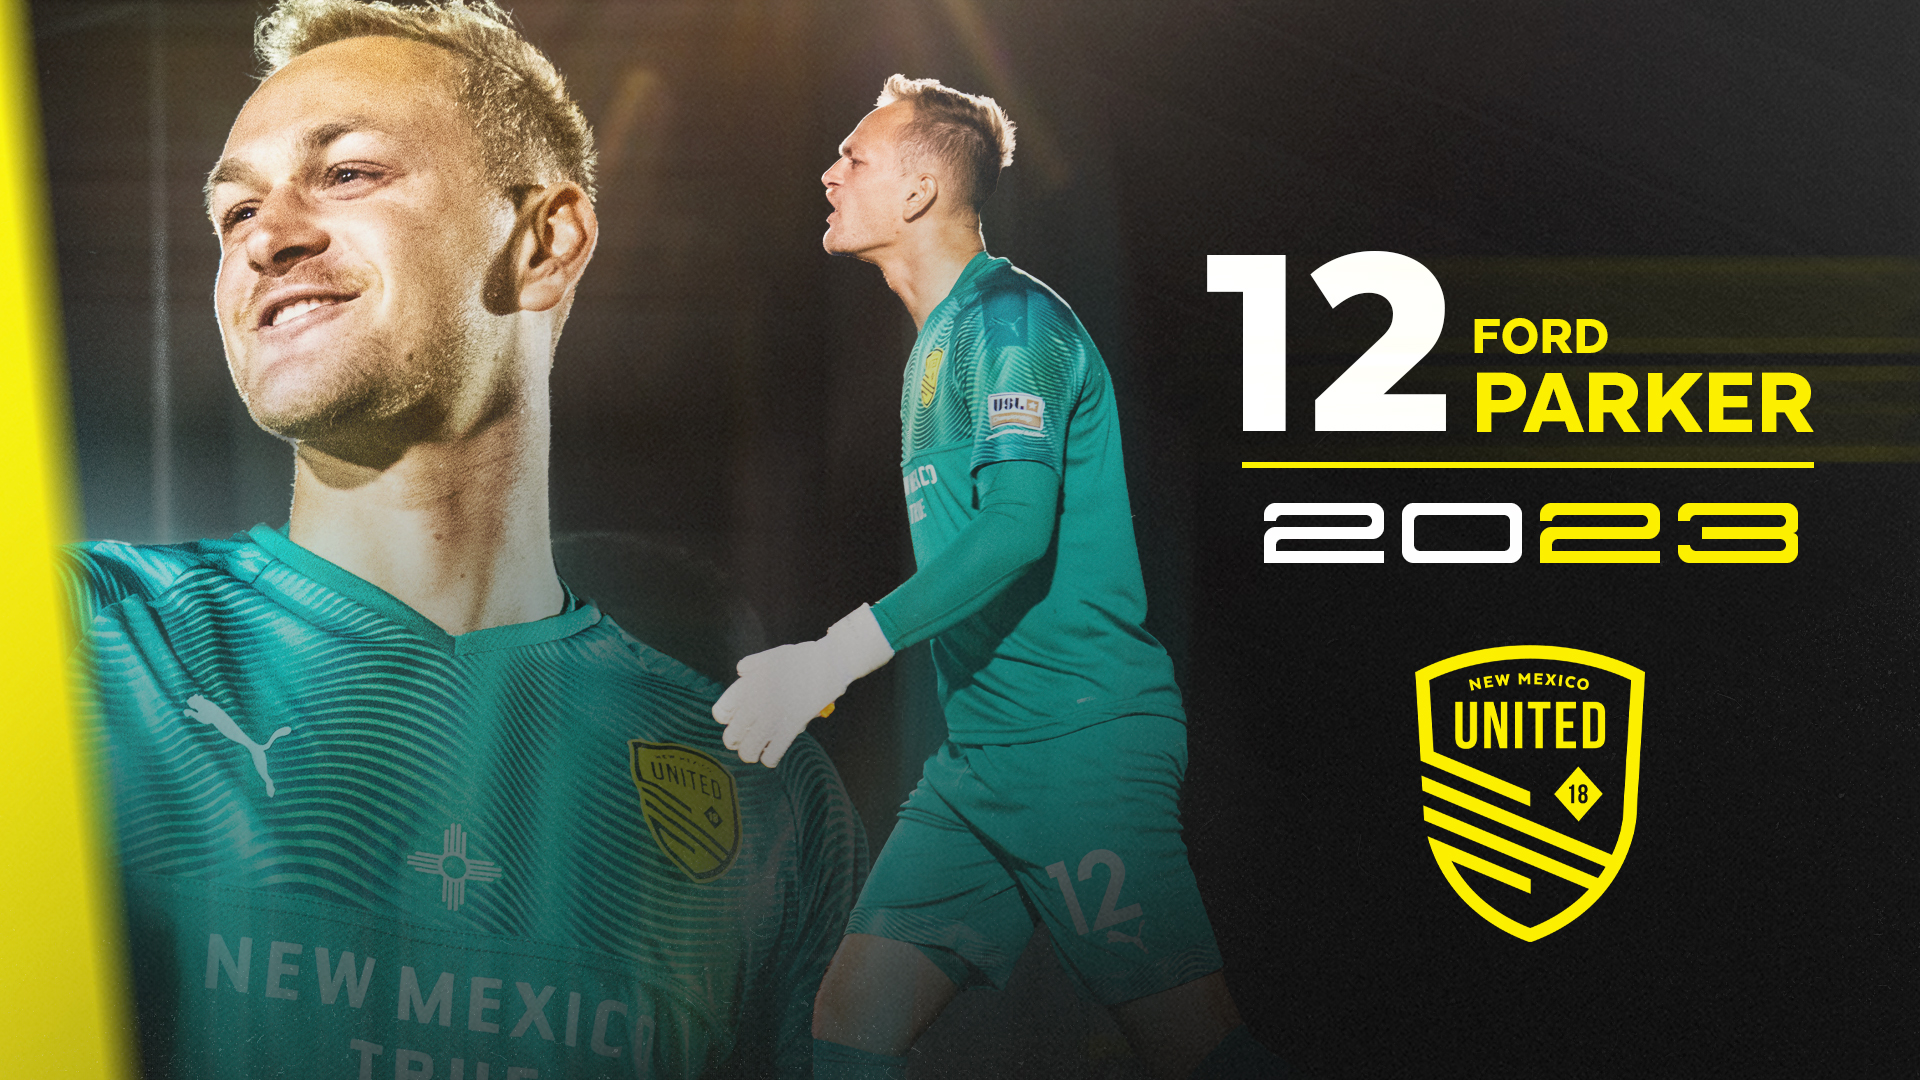 NEW MEXICO UNITED ANNOUNCES RETURN OF GOALKEEPER FORD PARKER New